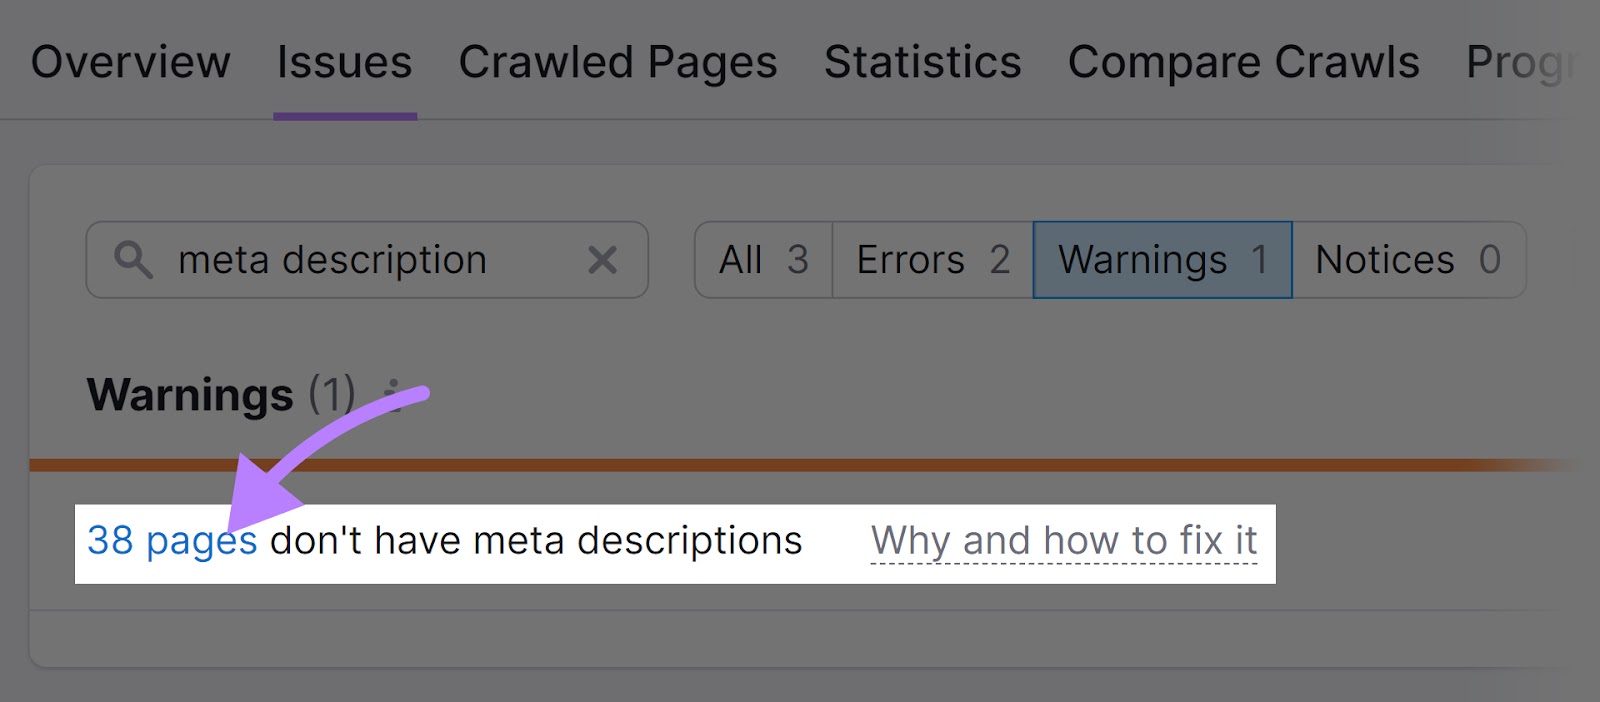 "38 pages don’t have meta descriptions” warning